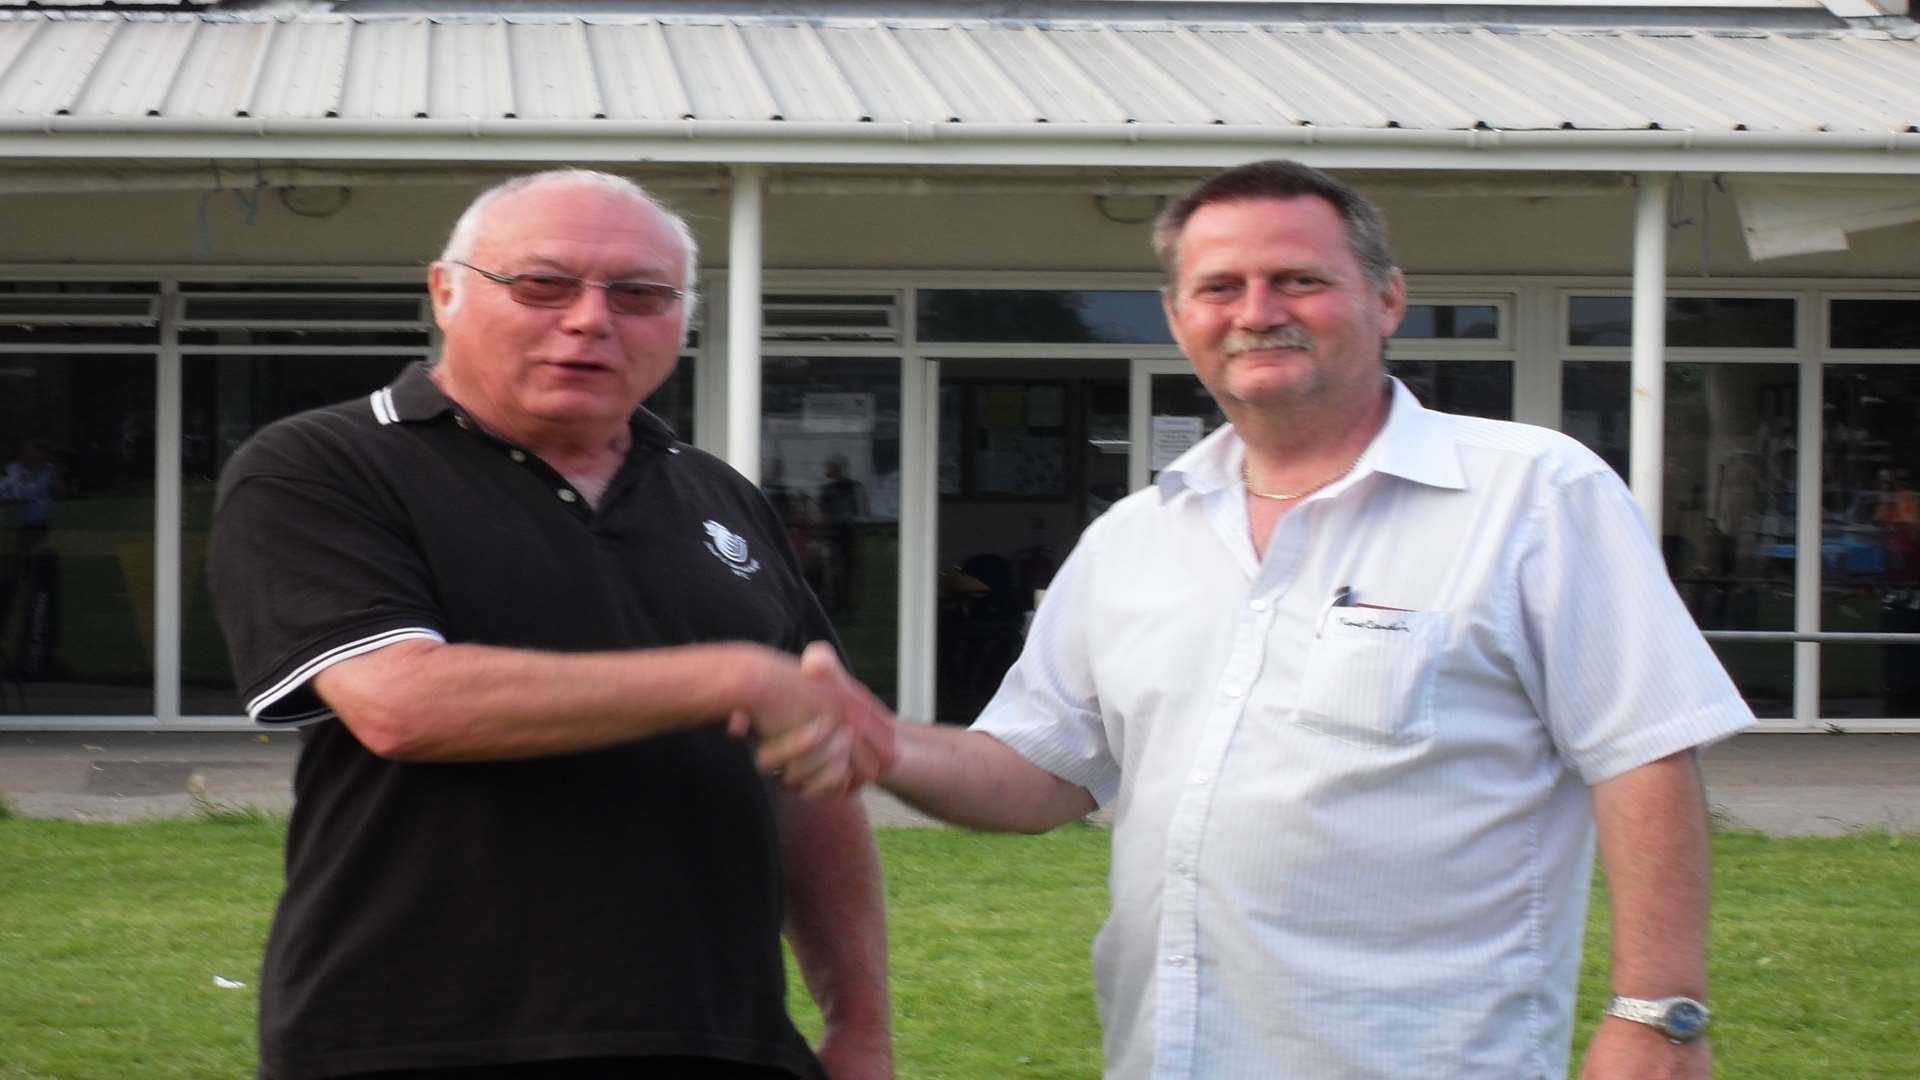 Member of Deal and Betteshanger RFC Dave Rose and Chairman of Deal Community Sports FC Steve Bowers